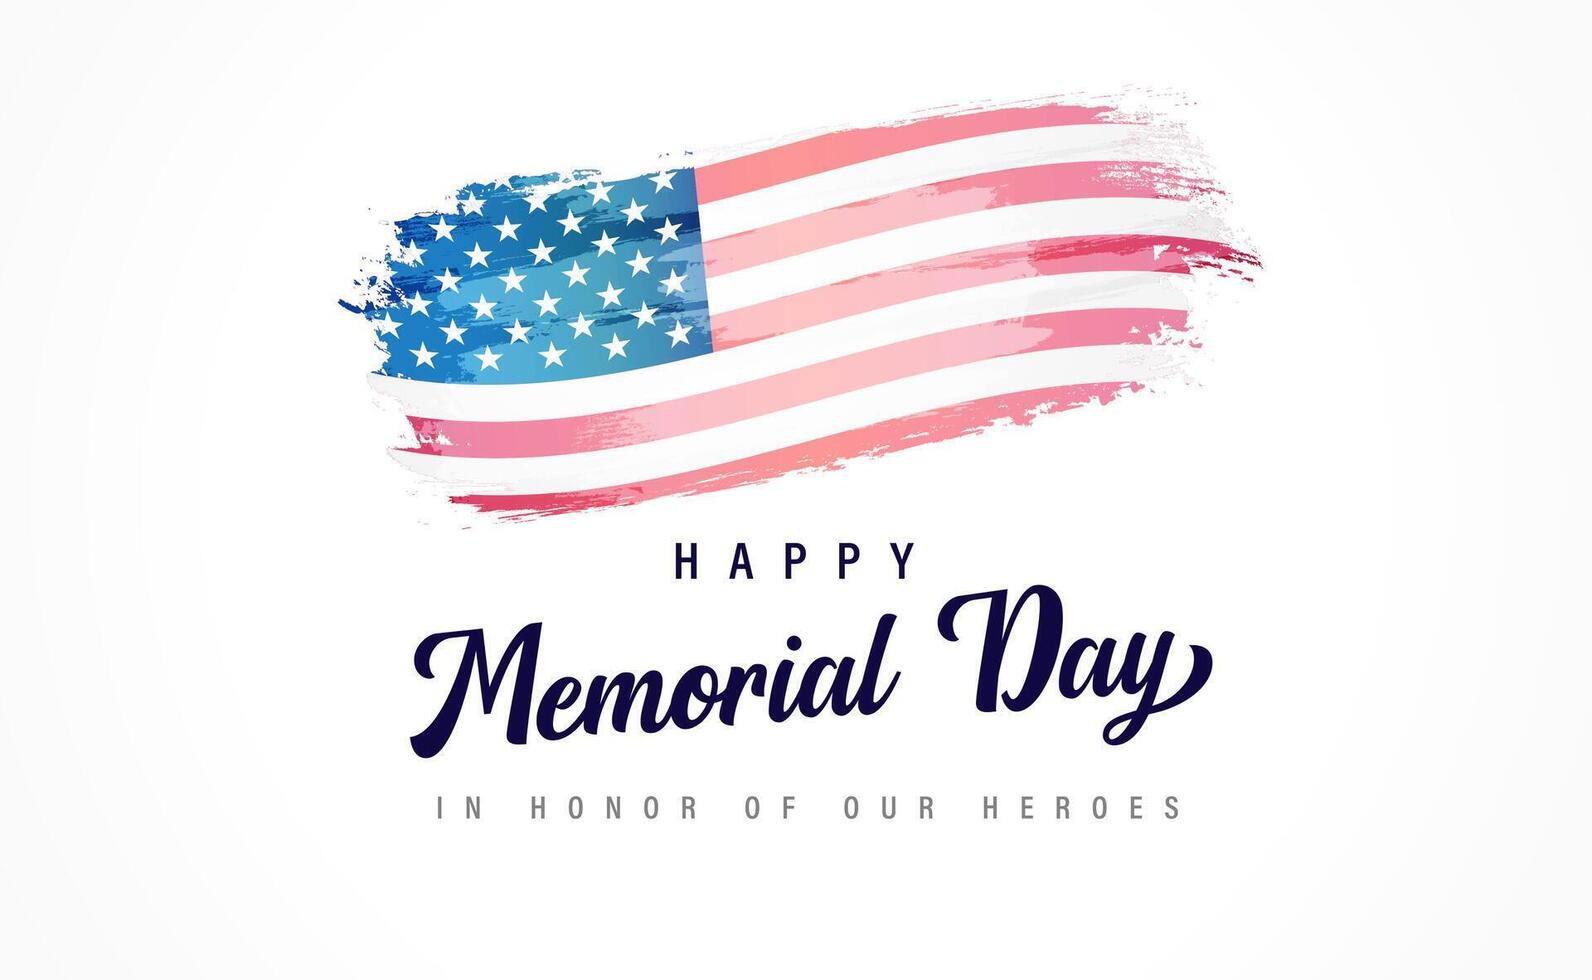 Happy Memorial Day social media poster with creative grunge style flag vector